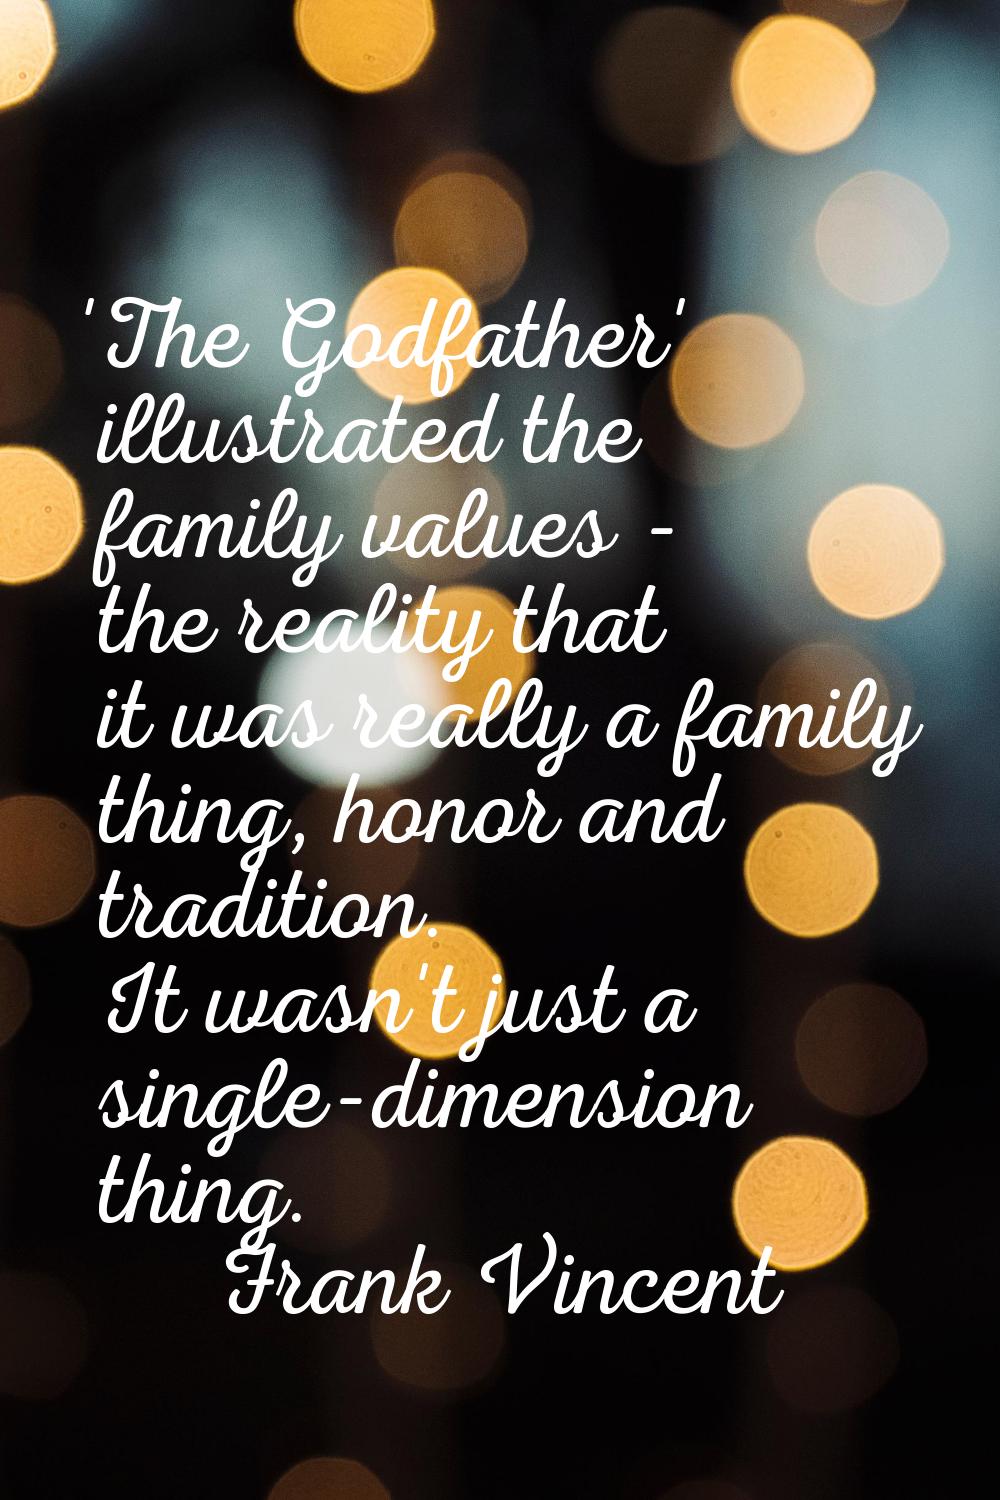 'The Godfather' illustrated the family values - the reality that it was really a family thing, hono